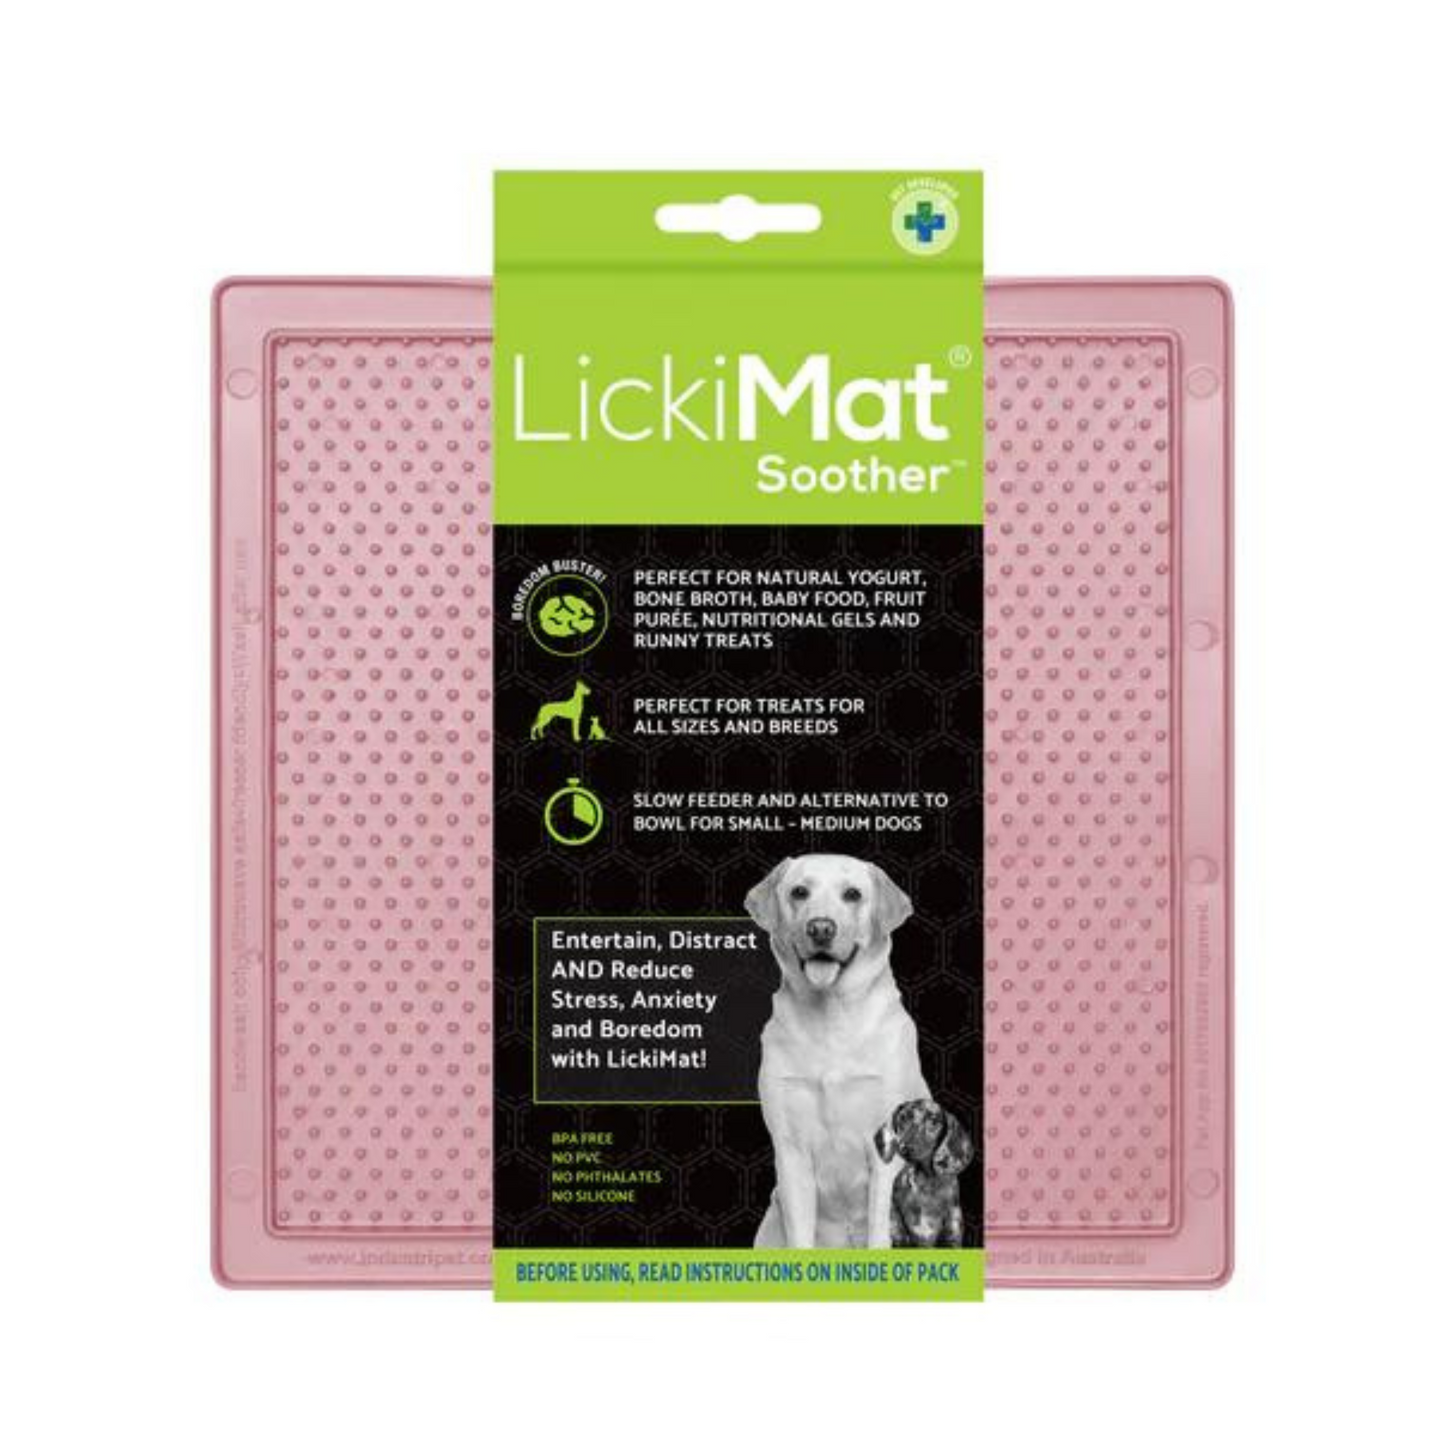 LickiMat Soother Classic Dog Slow Feeder Food Mat Orange, Pink, Turquoise